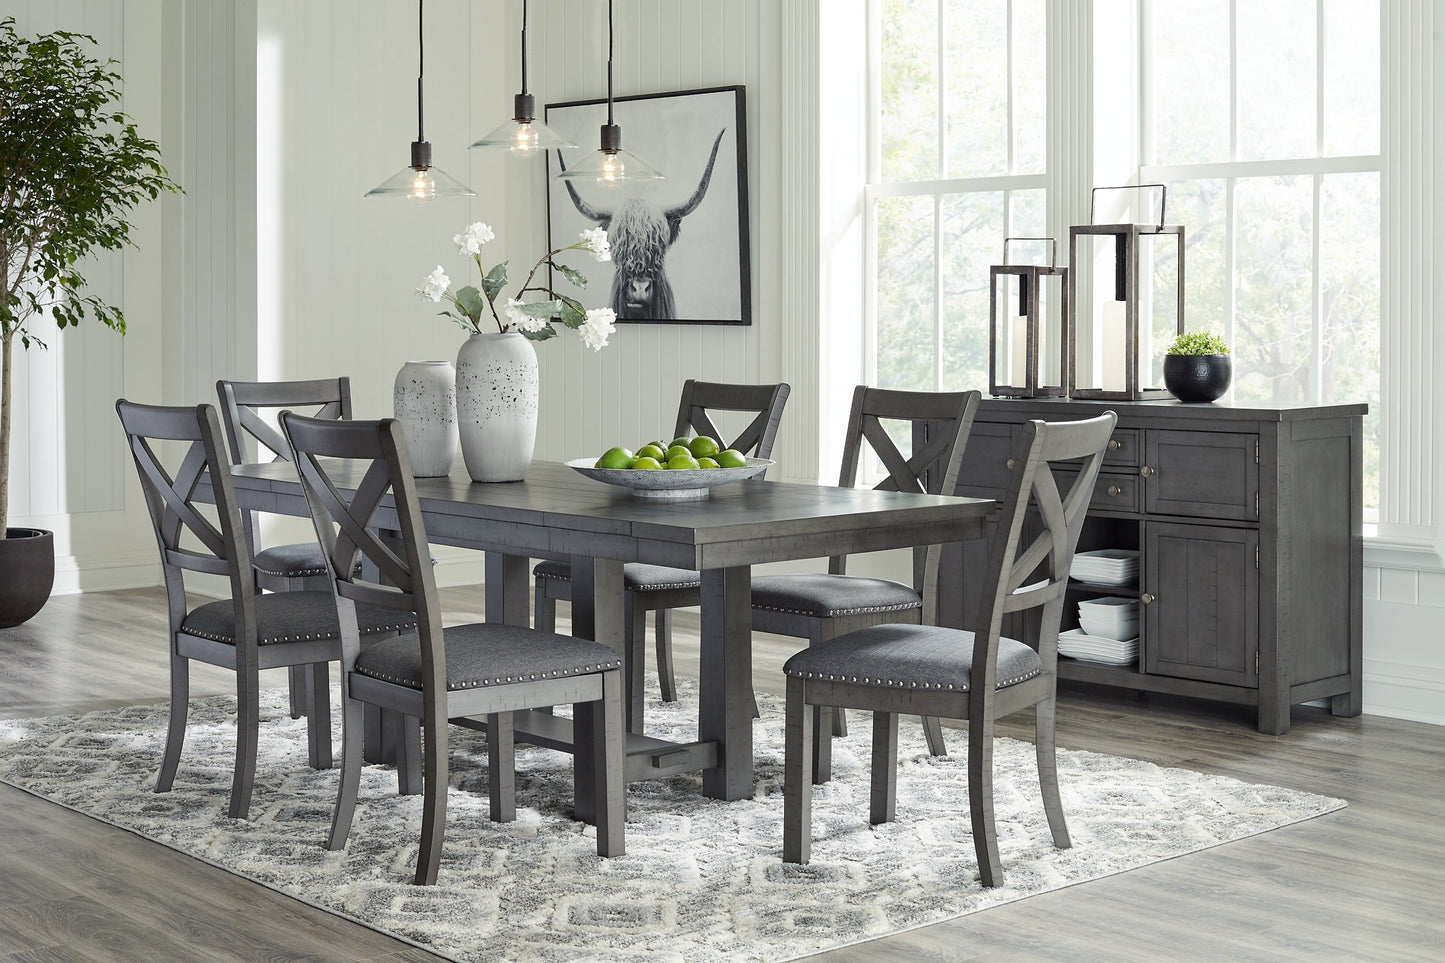 Myshanna Dining Table and 6 Chairs with Storage Rent Wise Rent To Own Jacksonville, Florida